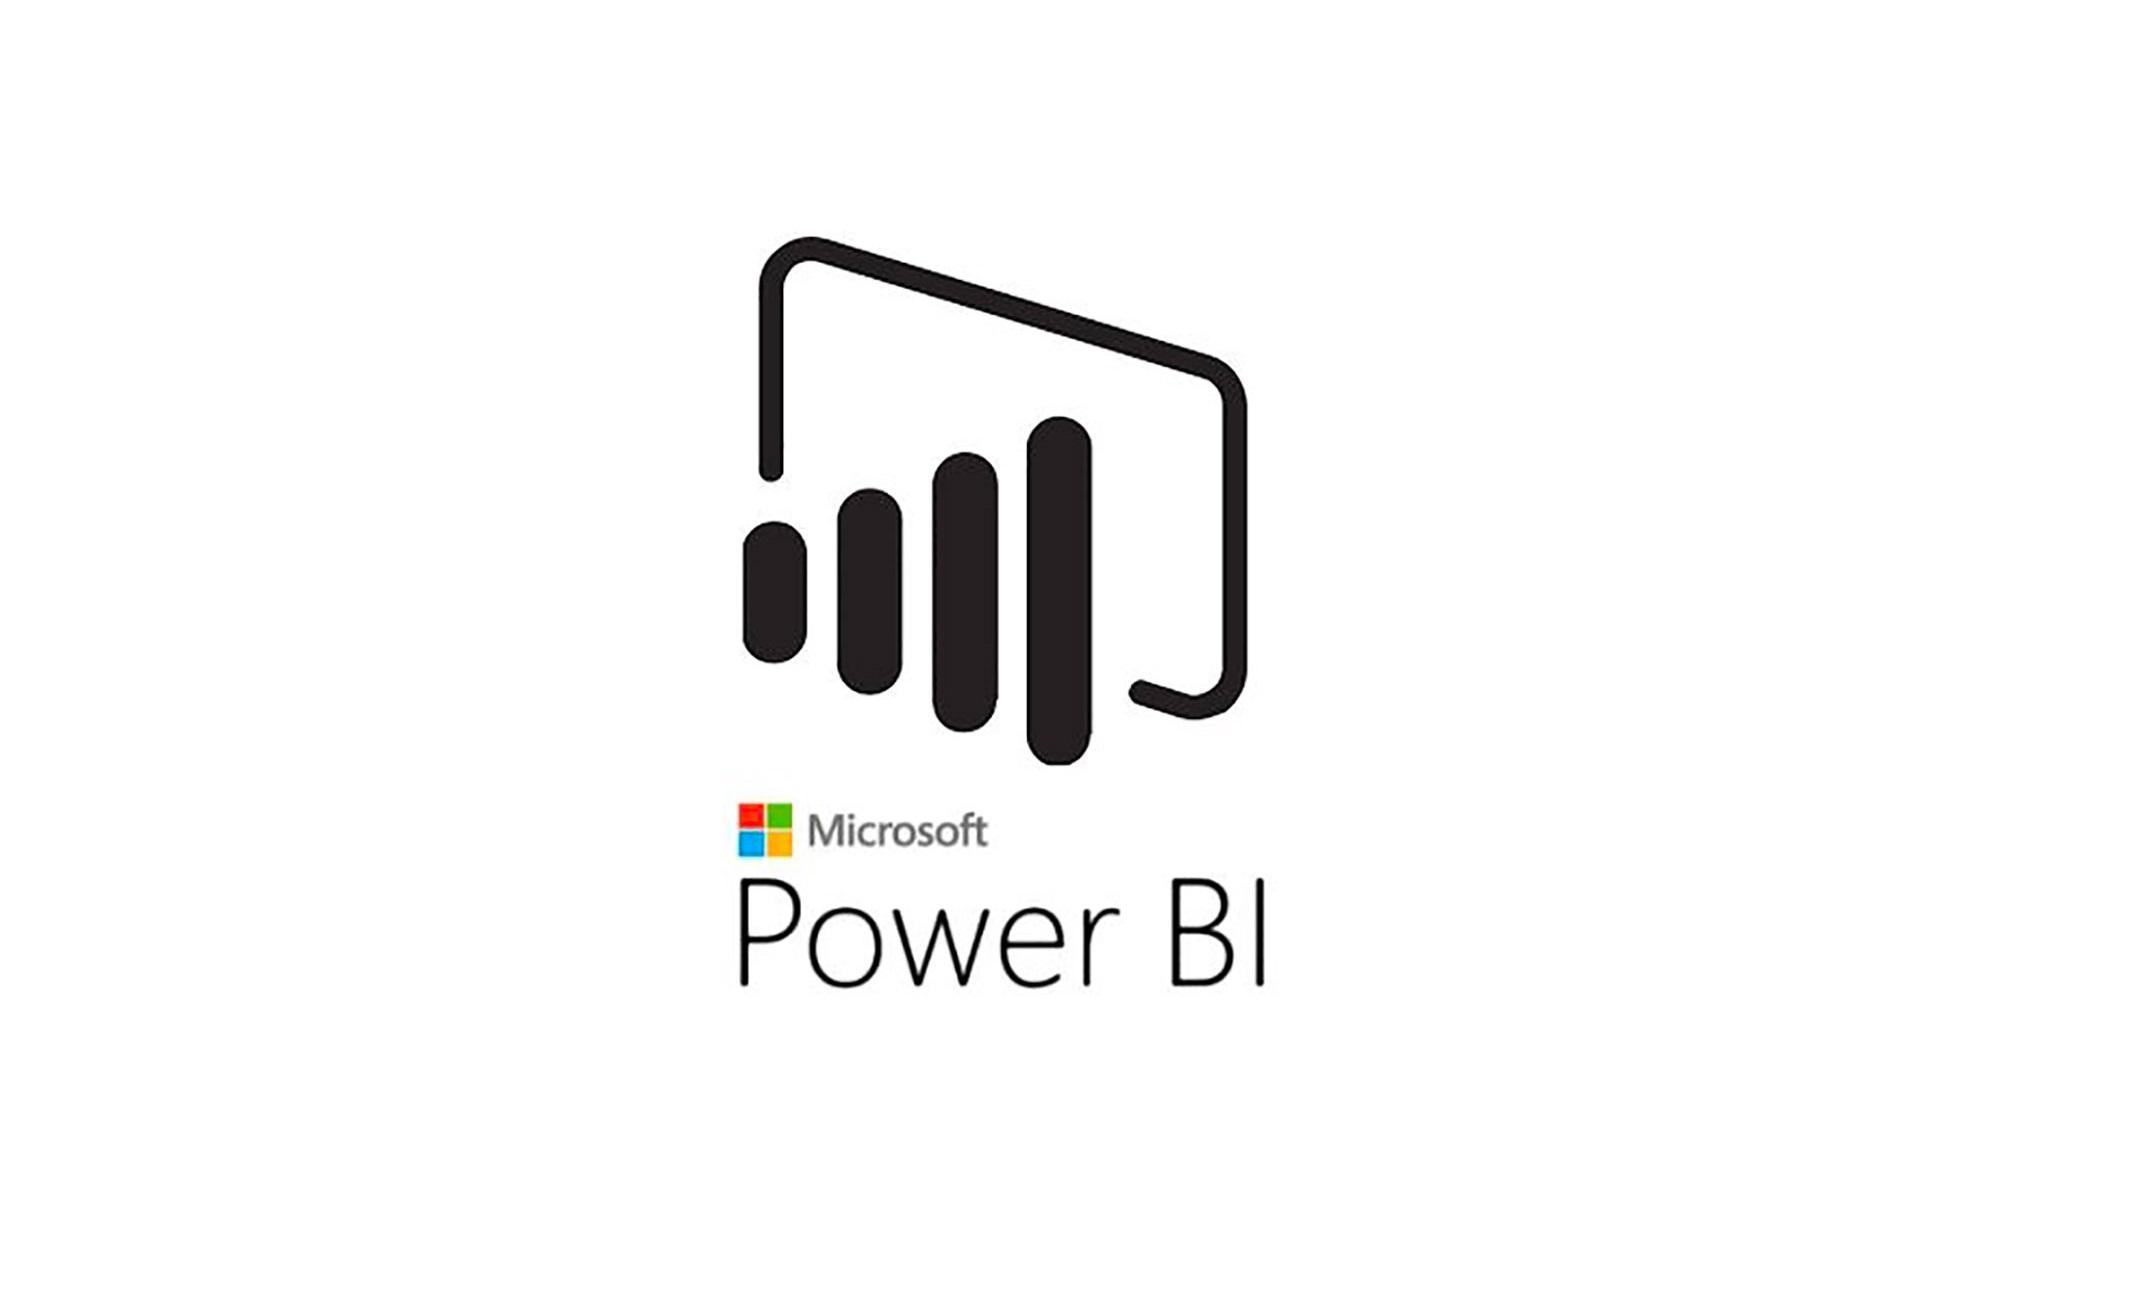 4 Weeks Microsoft Power BI Training in Kissimmee| Introduction to Power BI training for beginners | Getting started with Power BI | What is Power BI | March 30, 2020 - April 22, 2020